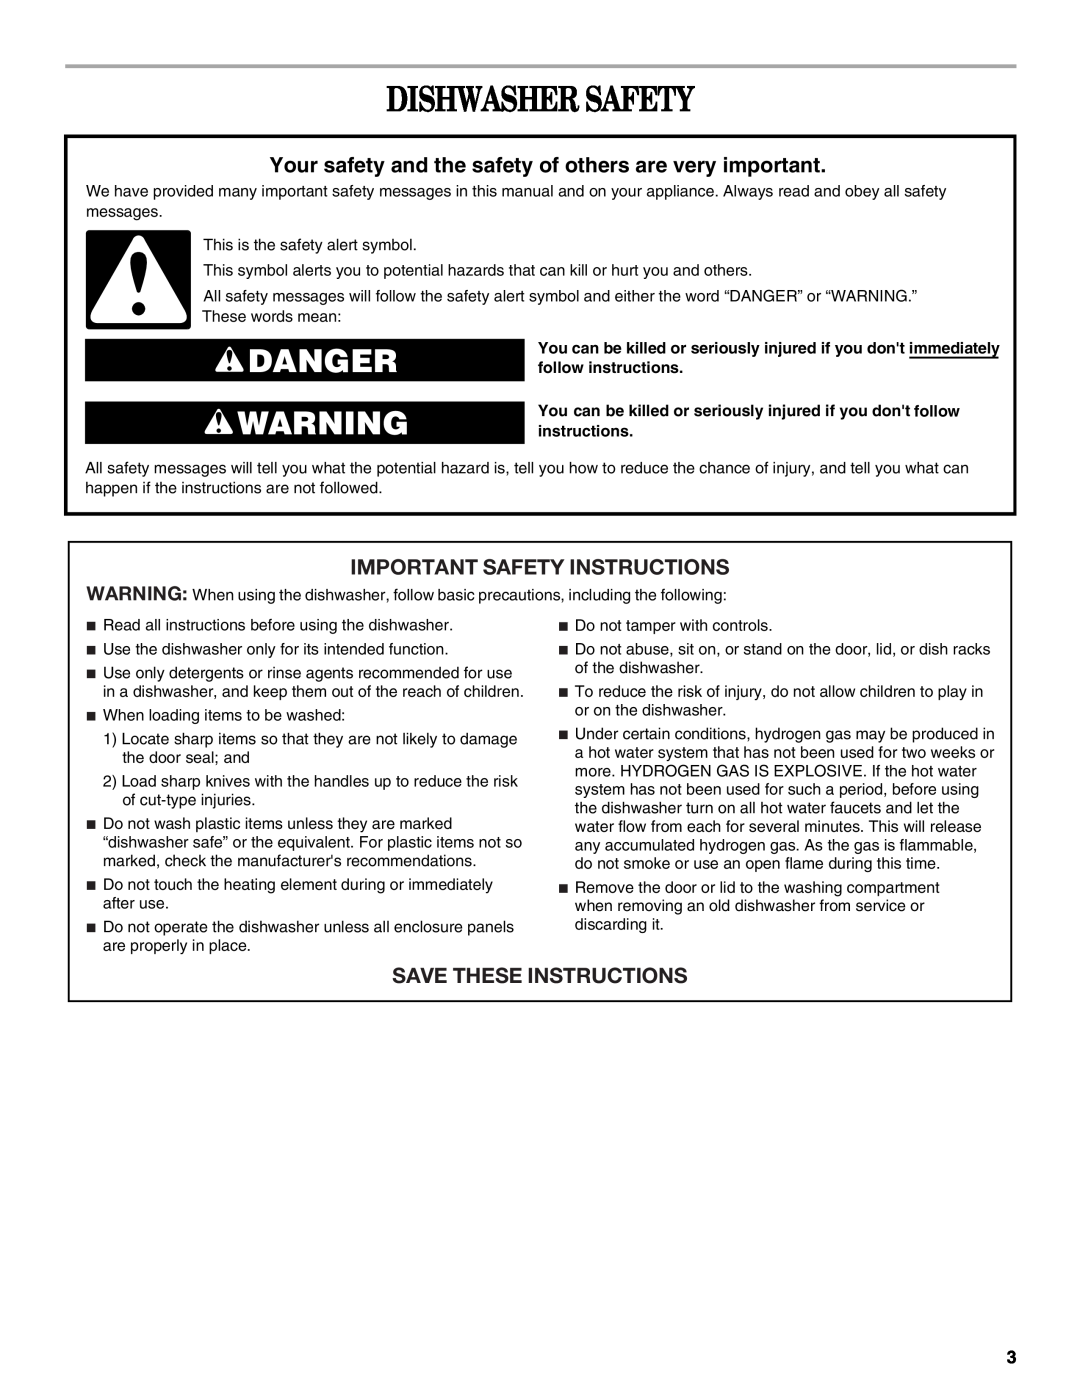 Whirlpool ISU5846 manual Dishwasher Safety, Danger, Your safety and the safety of others are very important 